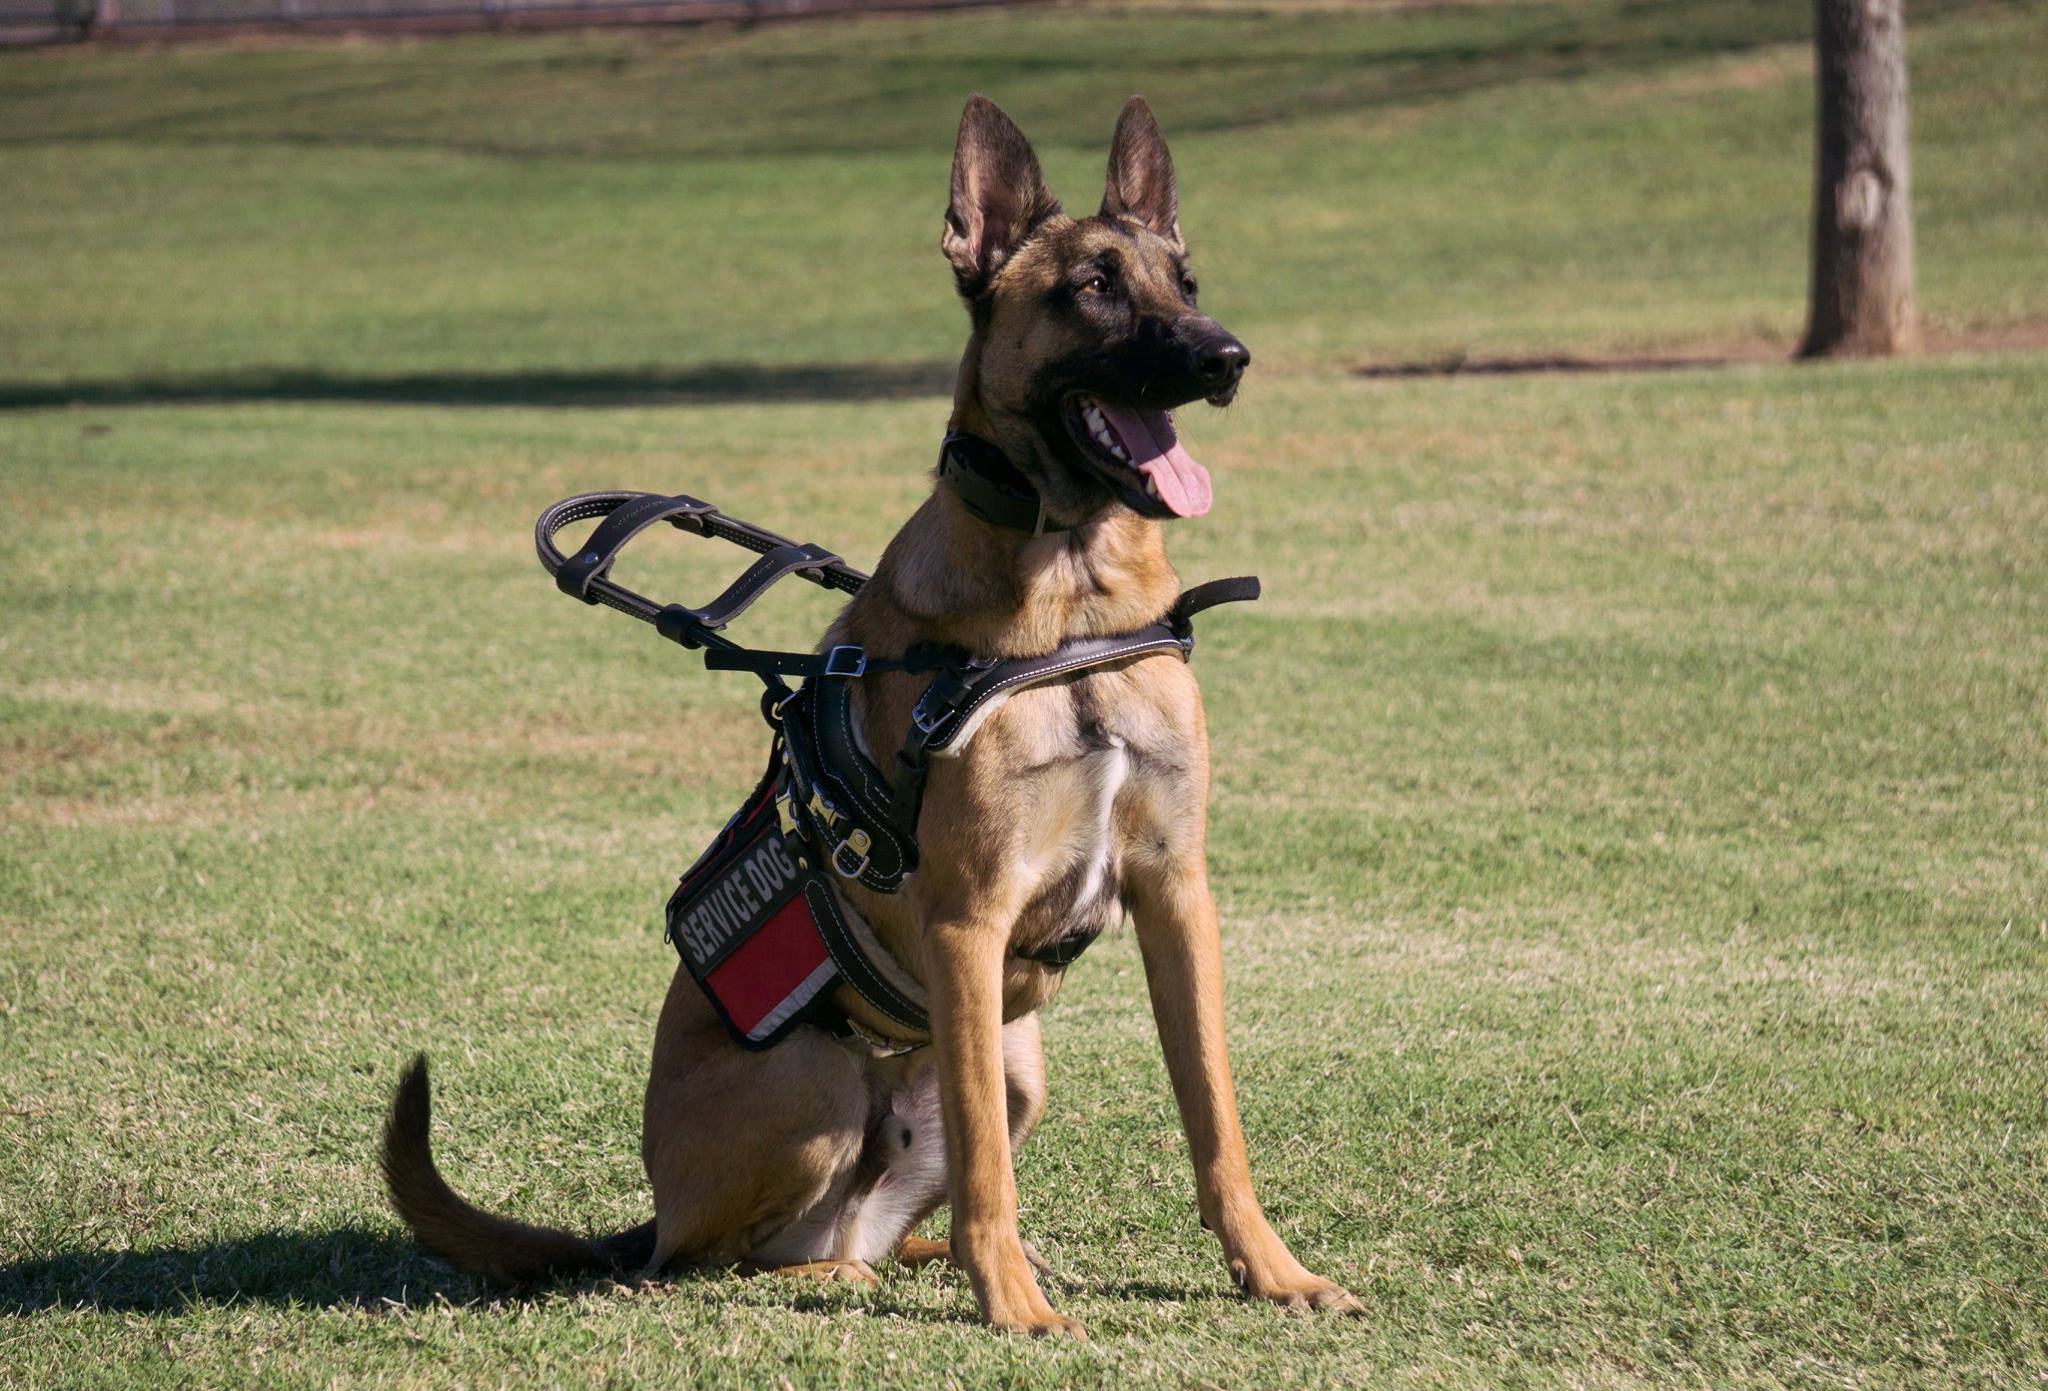 Spending Your Summer with a Service Dog in New Braunfels